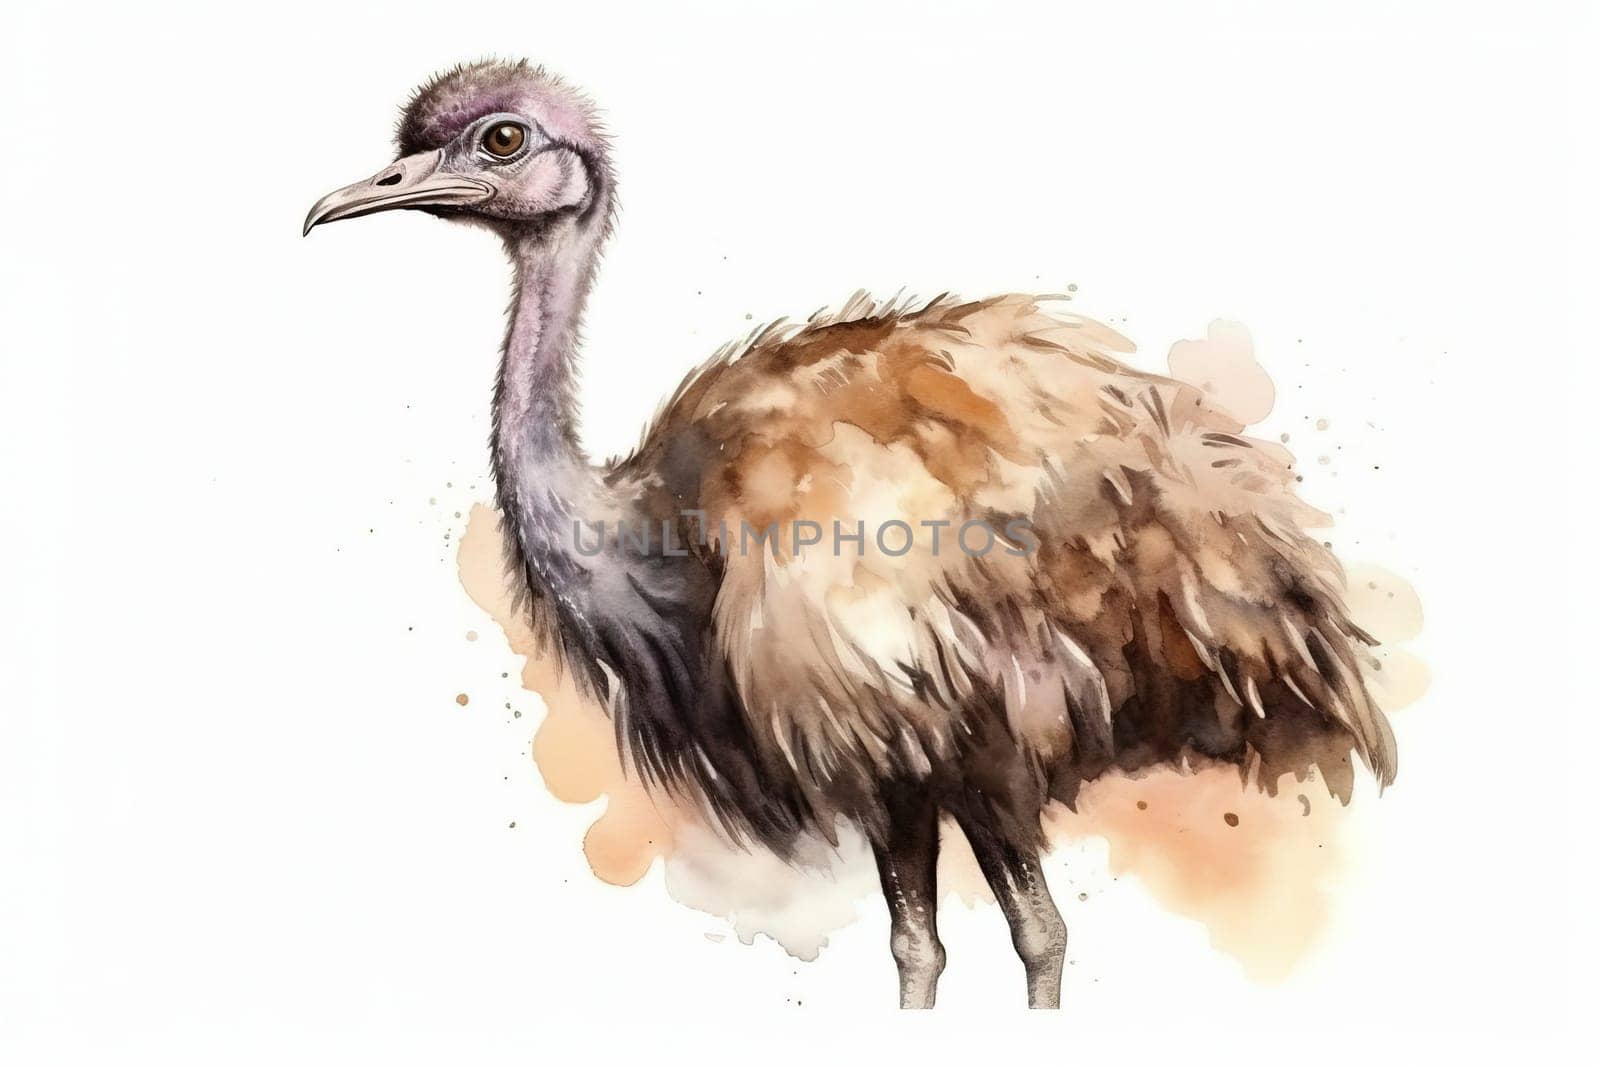 Watercolor Illustration Of Emu Ostrich On White by GekaSkr